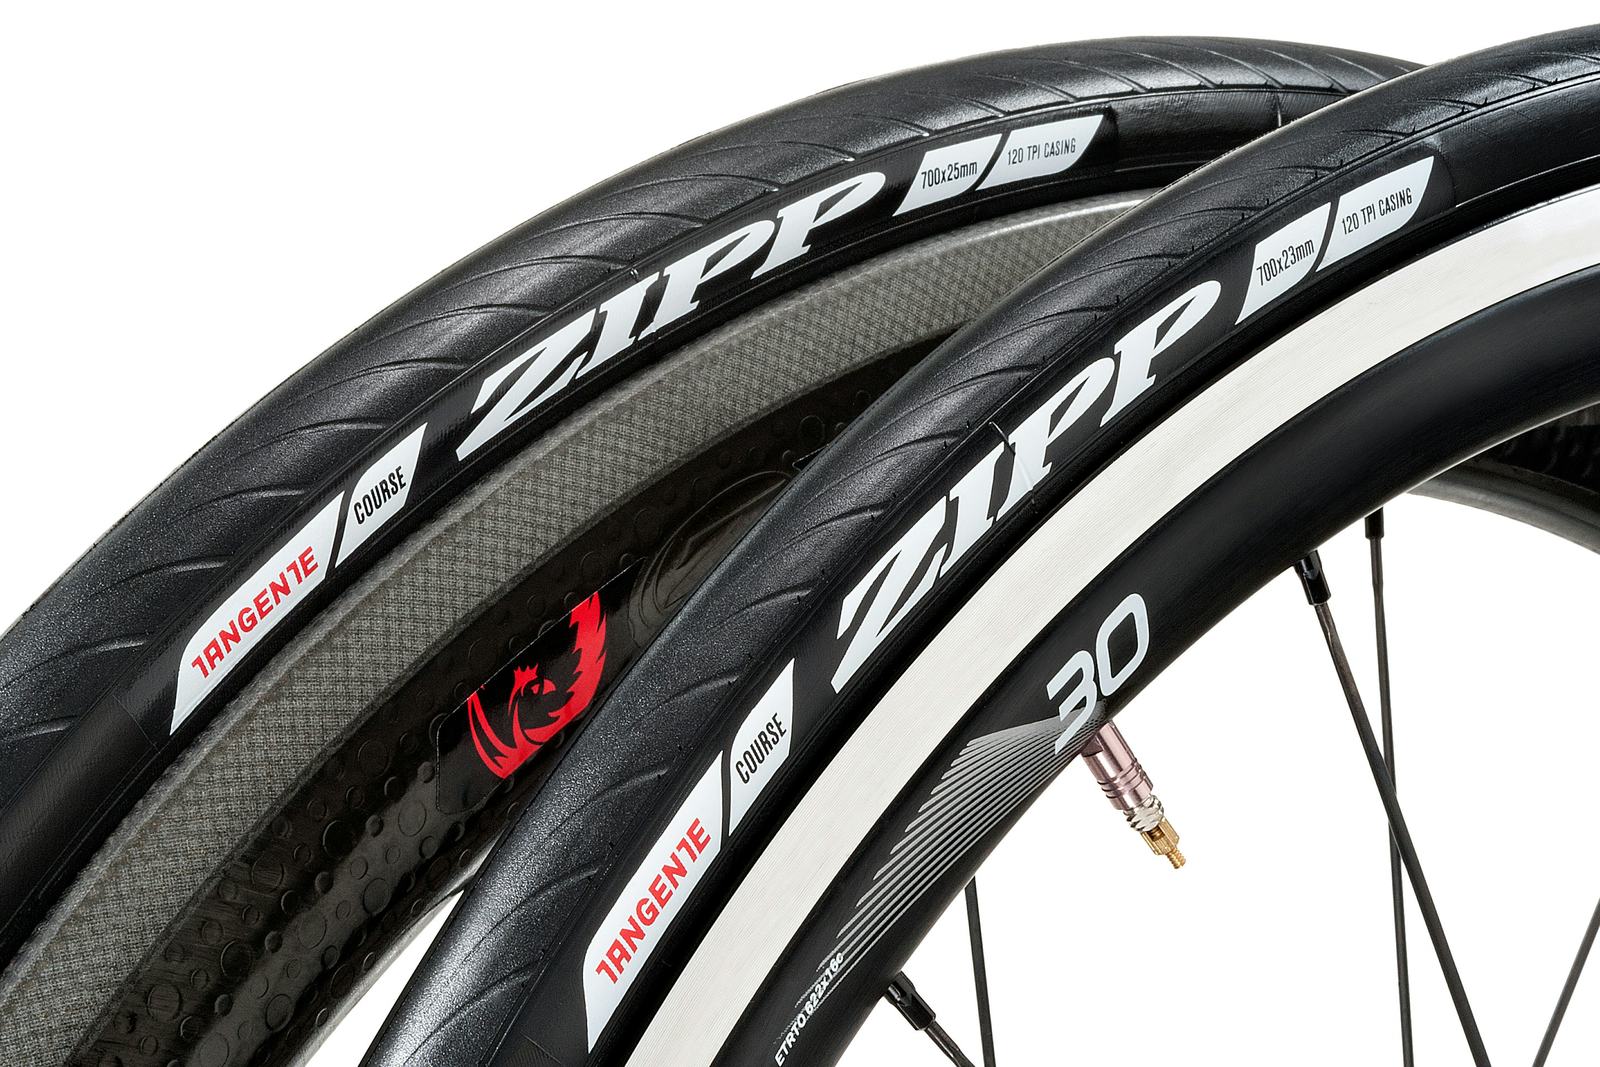 For the new Tangent tyres Zipp not only maximized the airflow, but also optimize rolling resistance. – Photo Zipp